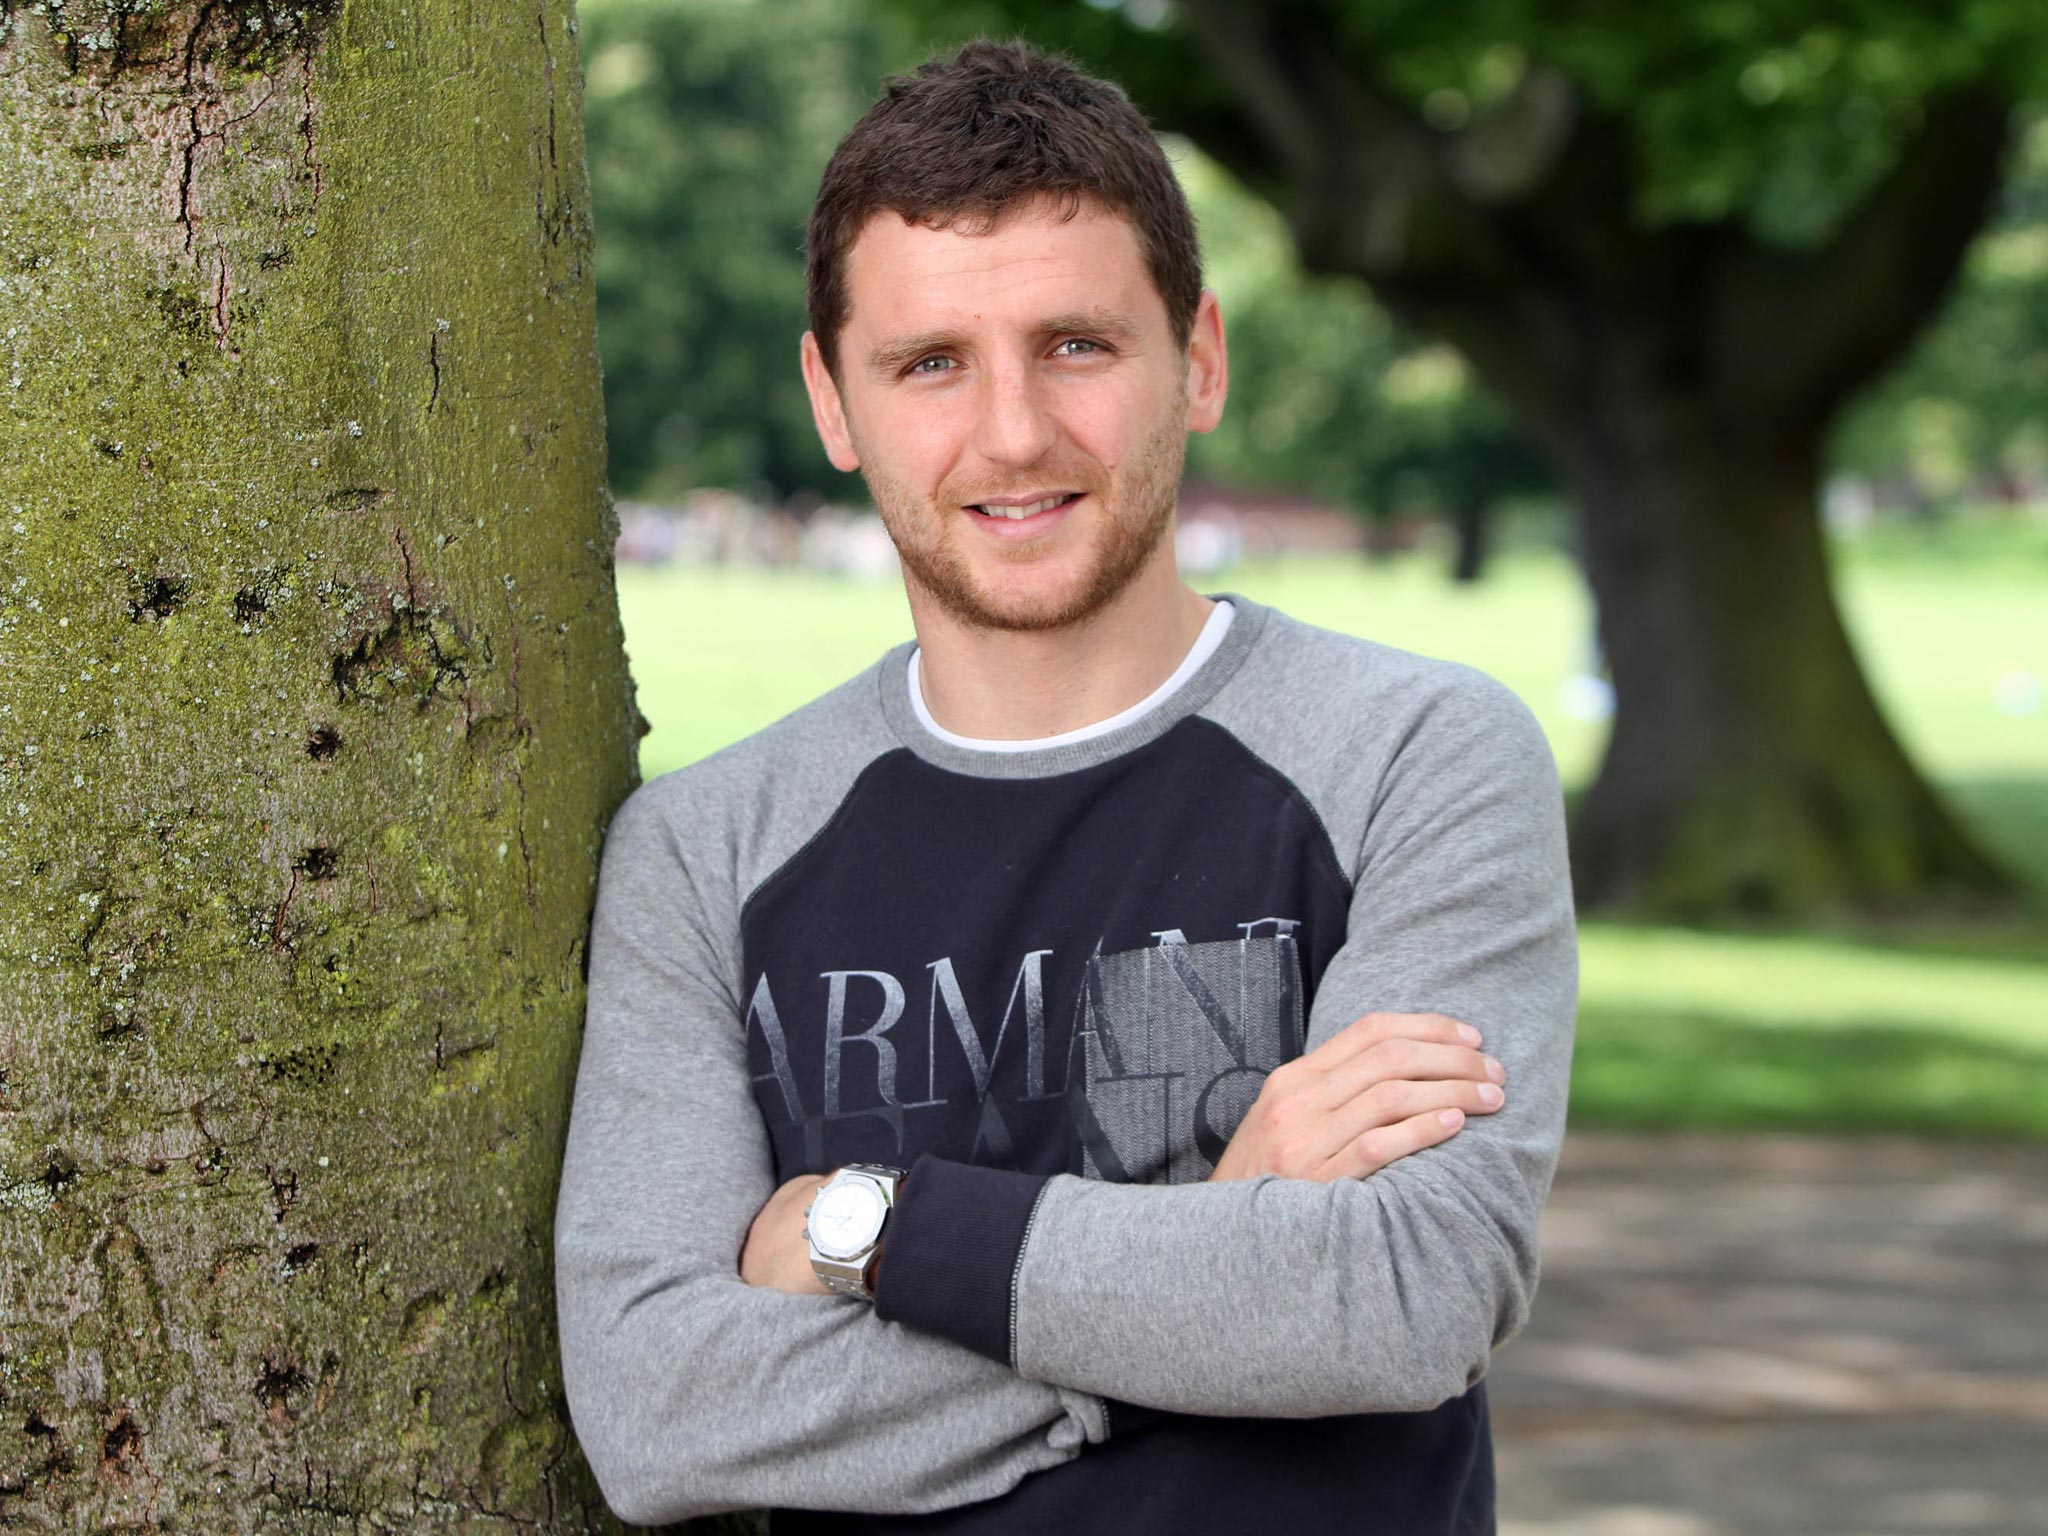 Alex Bruce faces his biggest game today – if he plays